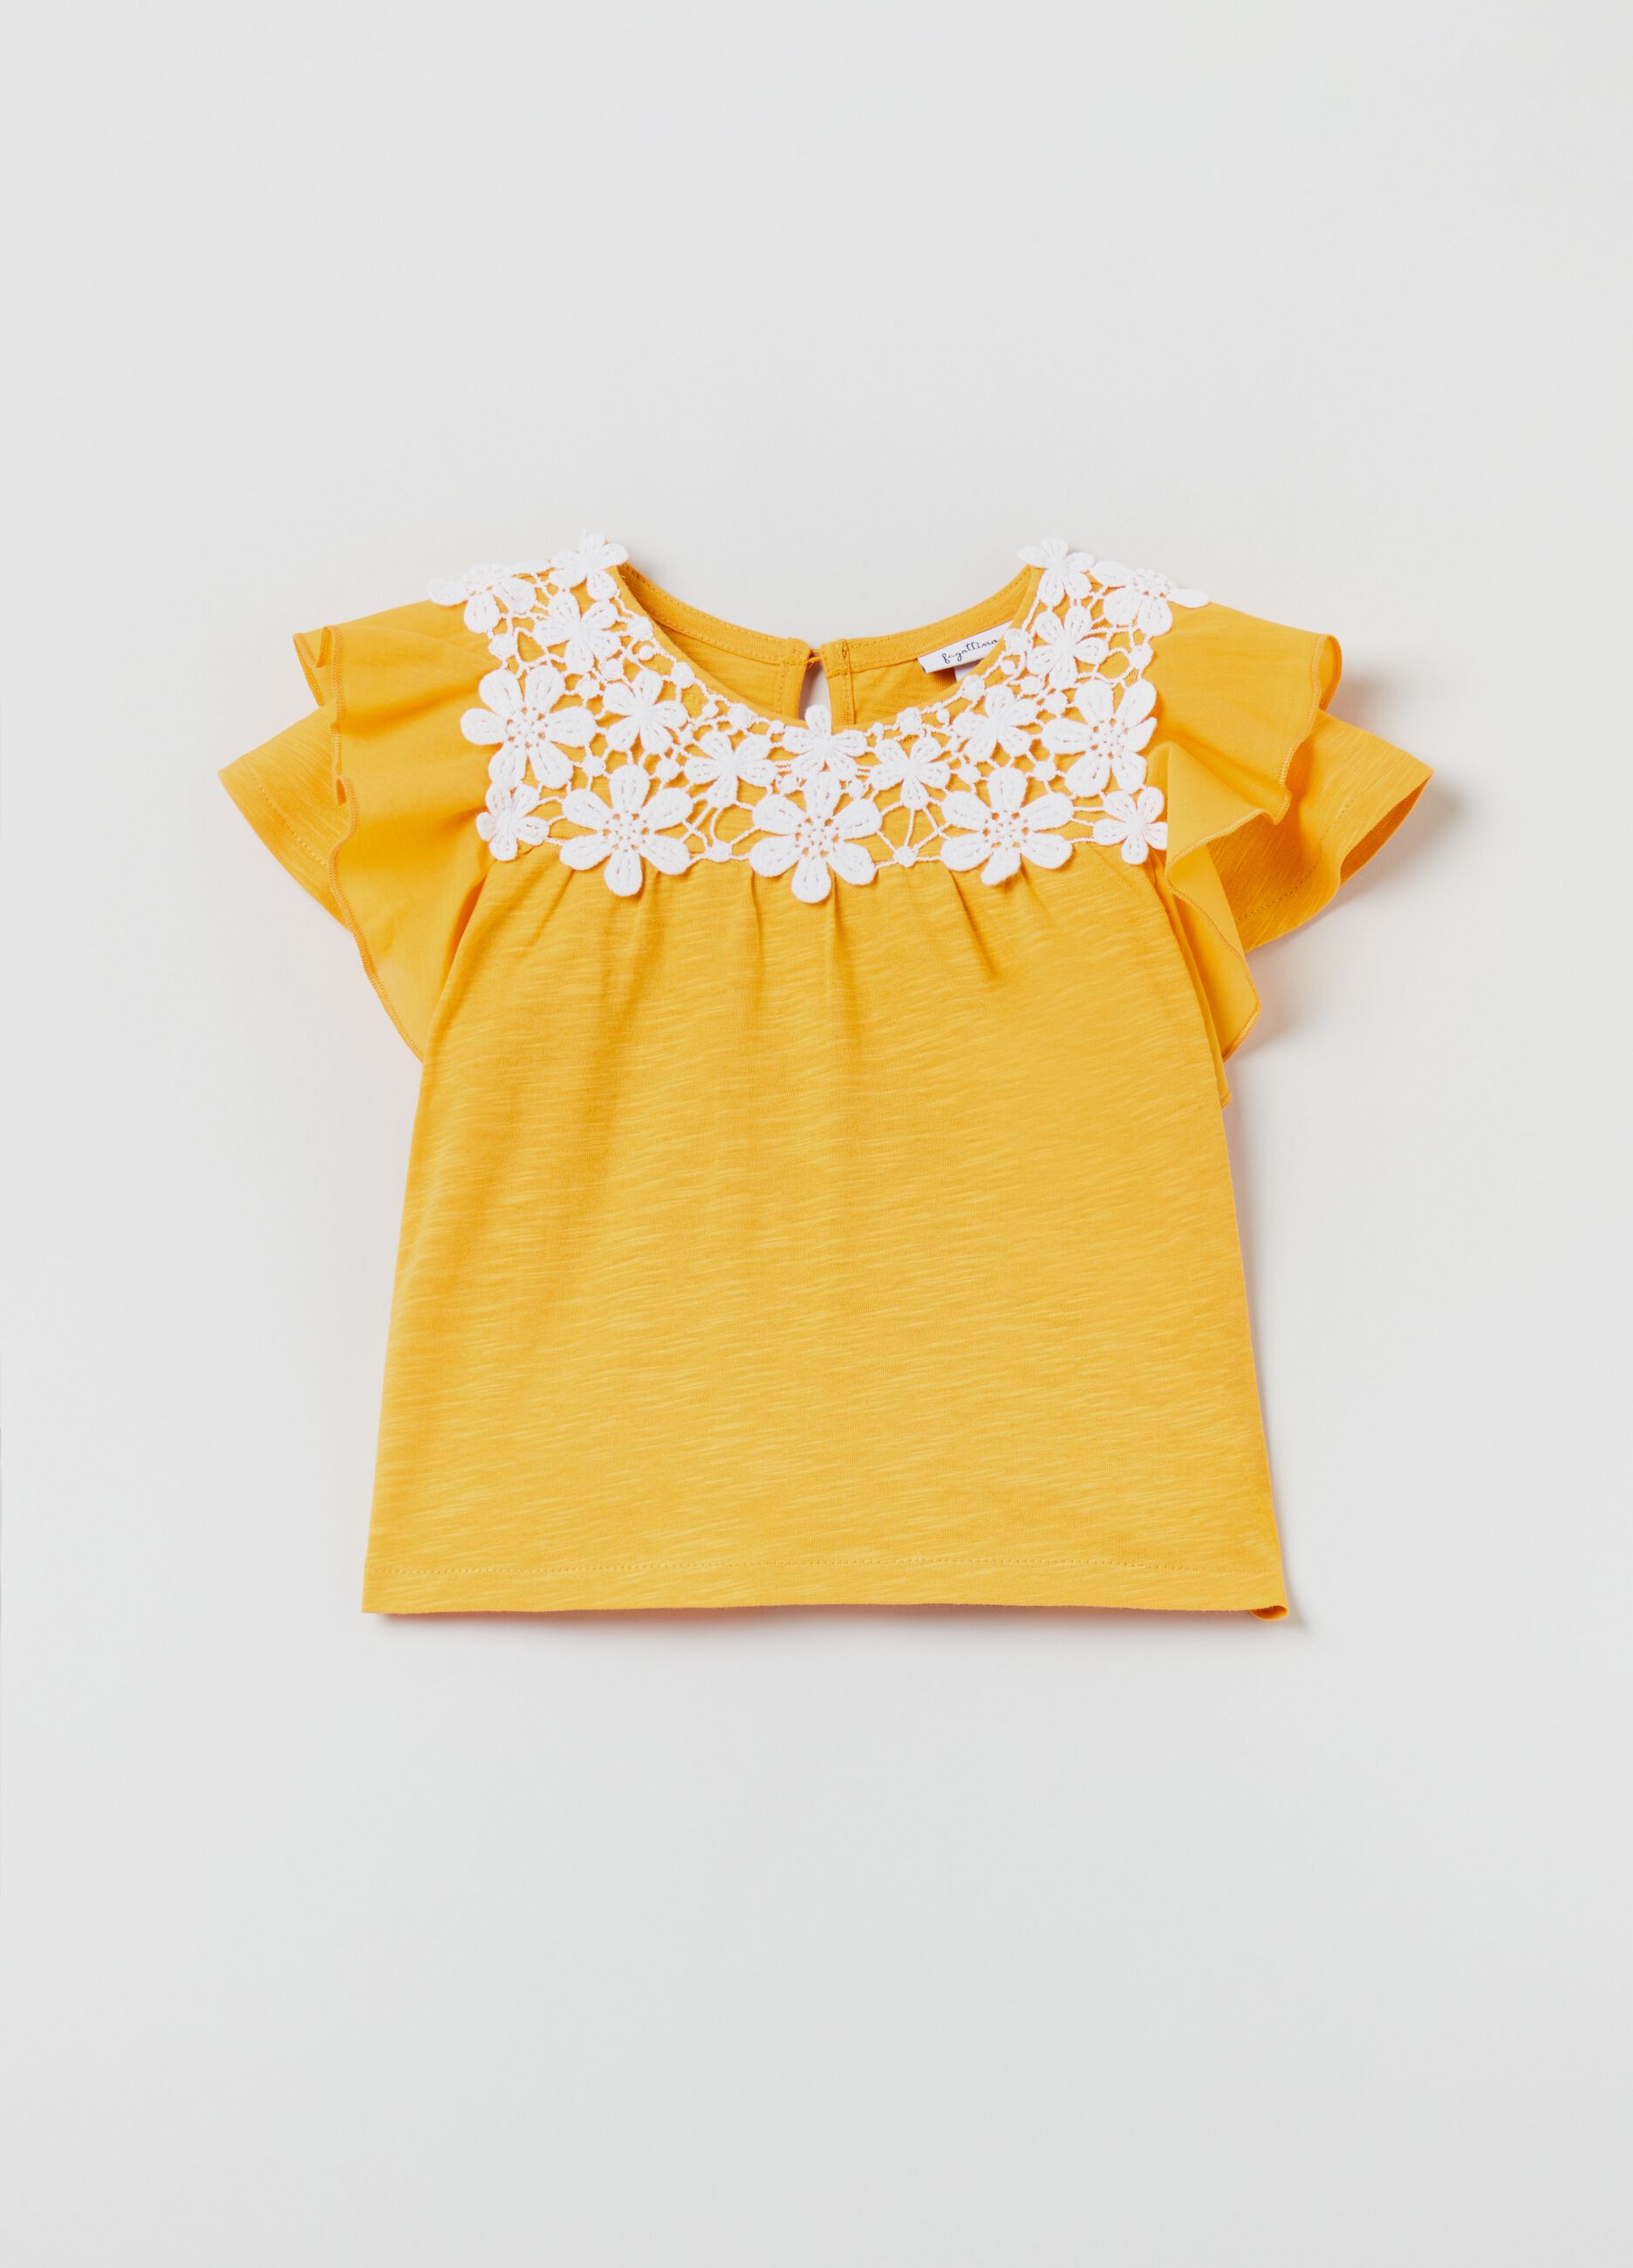 T-shirt with floral crochet application